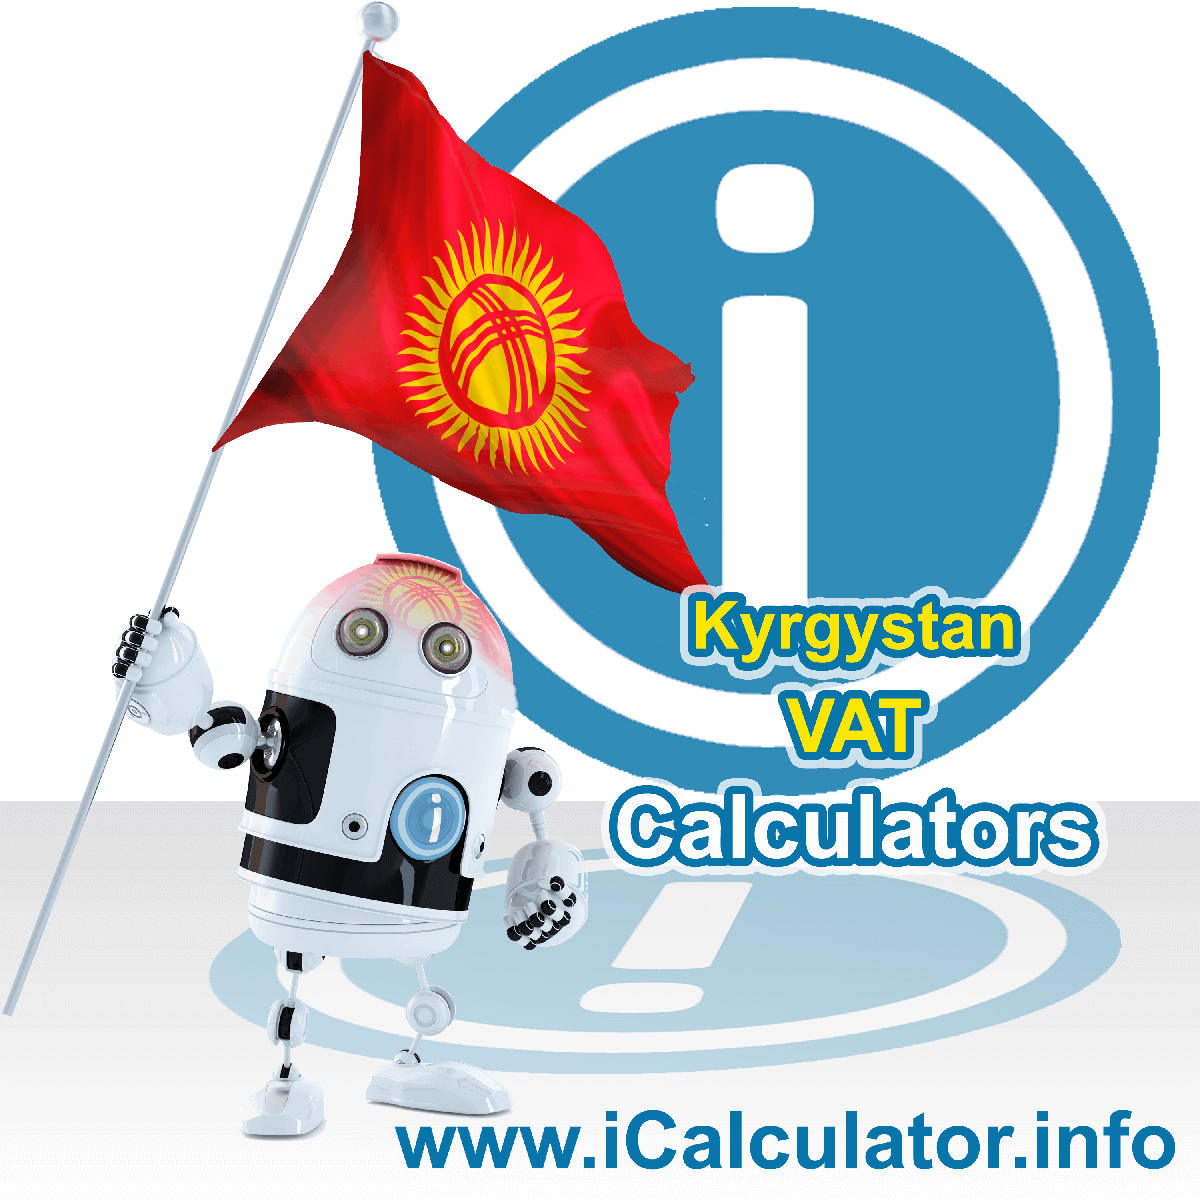 Kyrgyzstan VAT Calculator. This image shows the Kyrgyzstan flag and information relating to the VAT formula used for calculating Value Added Tax in Kyrgyzstan using the Kyrgyzstan VAT Calculator in 2022